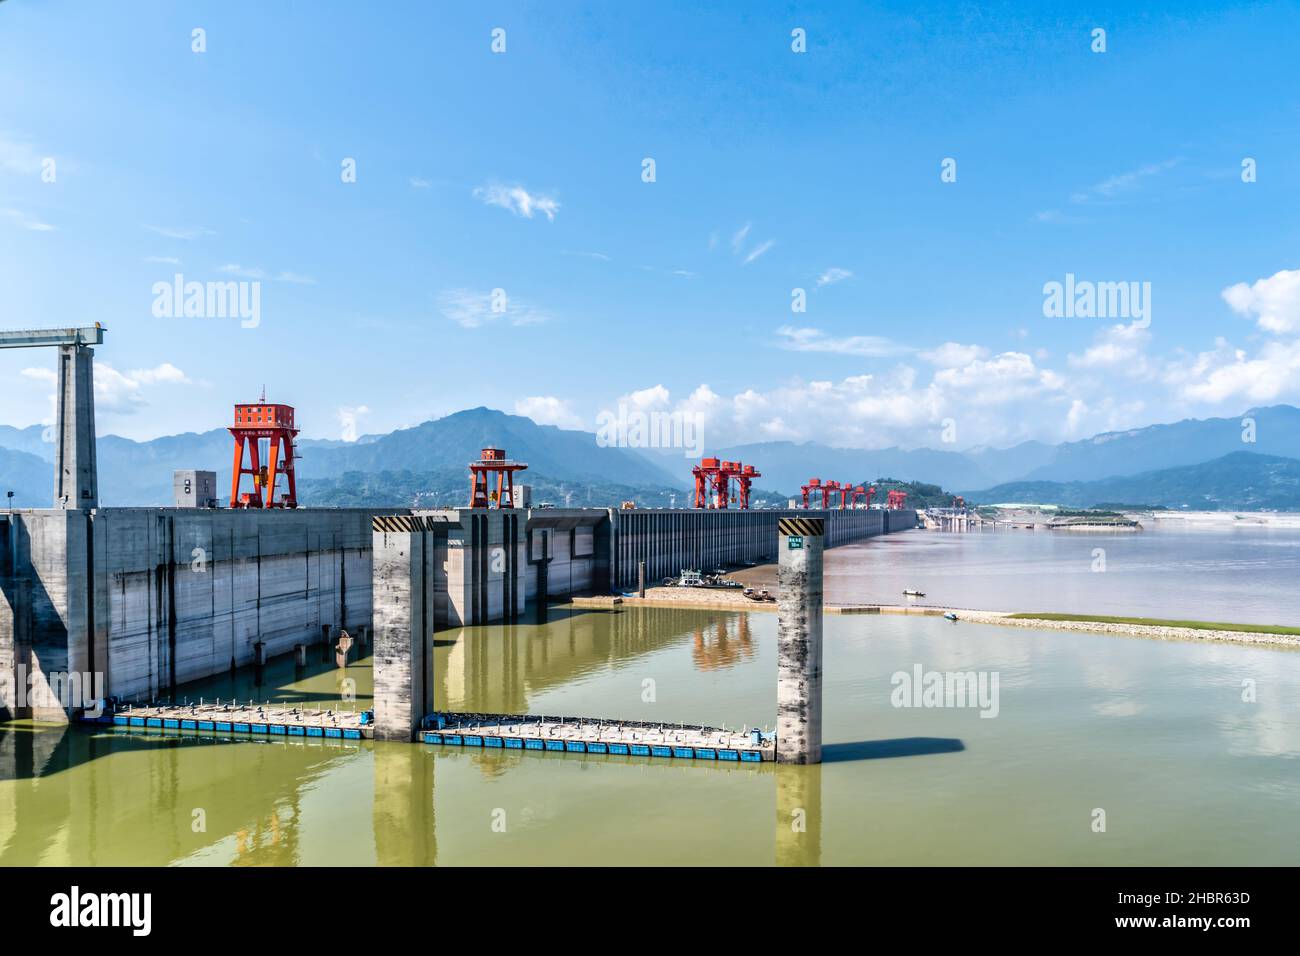 China's Yangtze Three Gorges Dam Project  is one of the biggest hydroelectric power projects in the world. Stock Photo